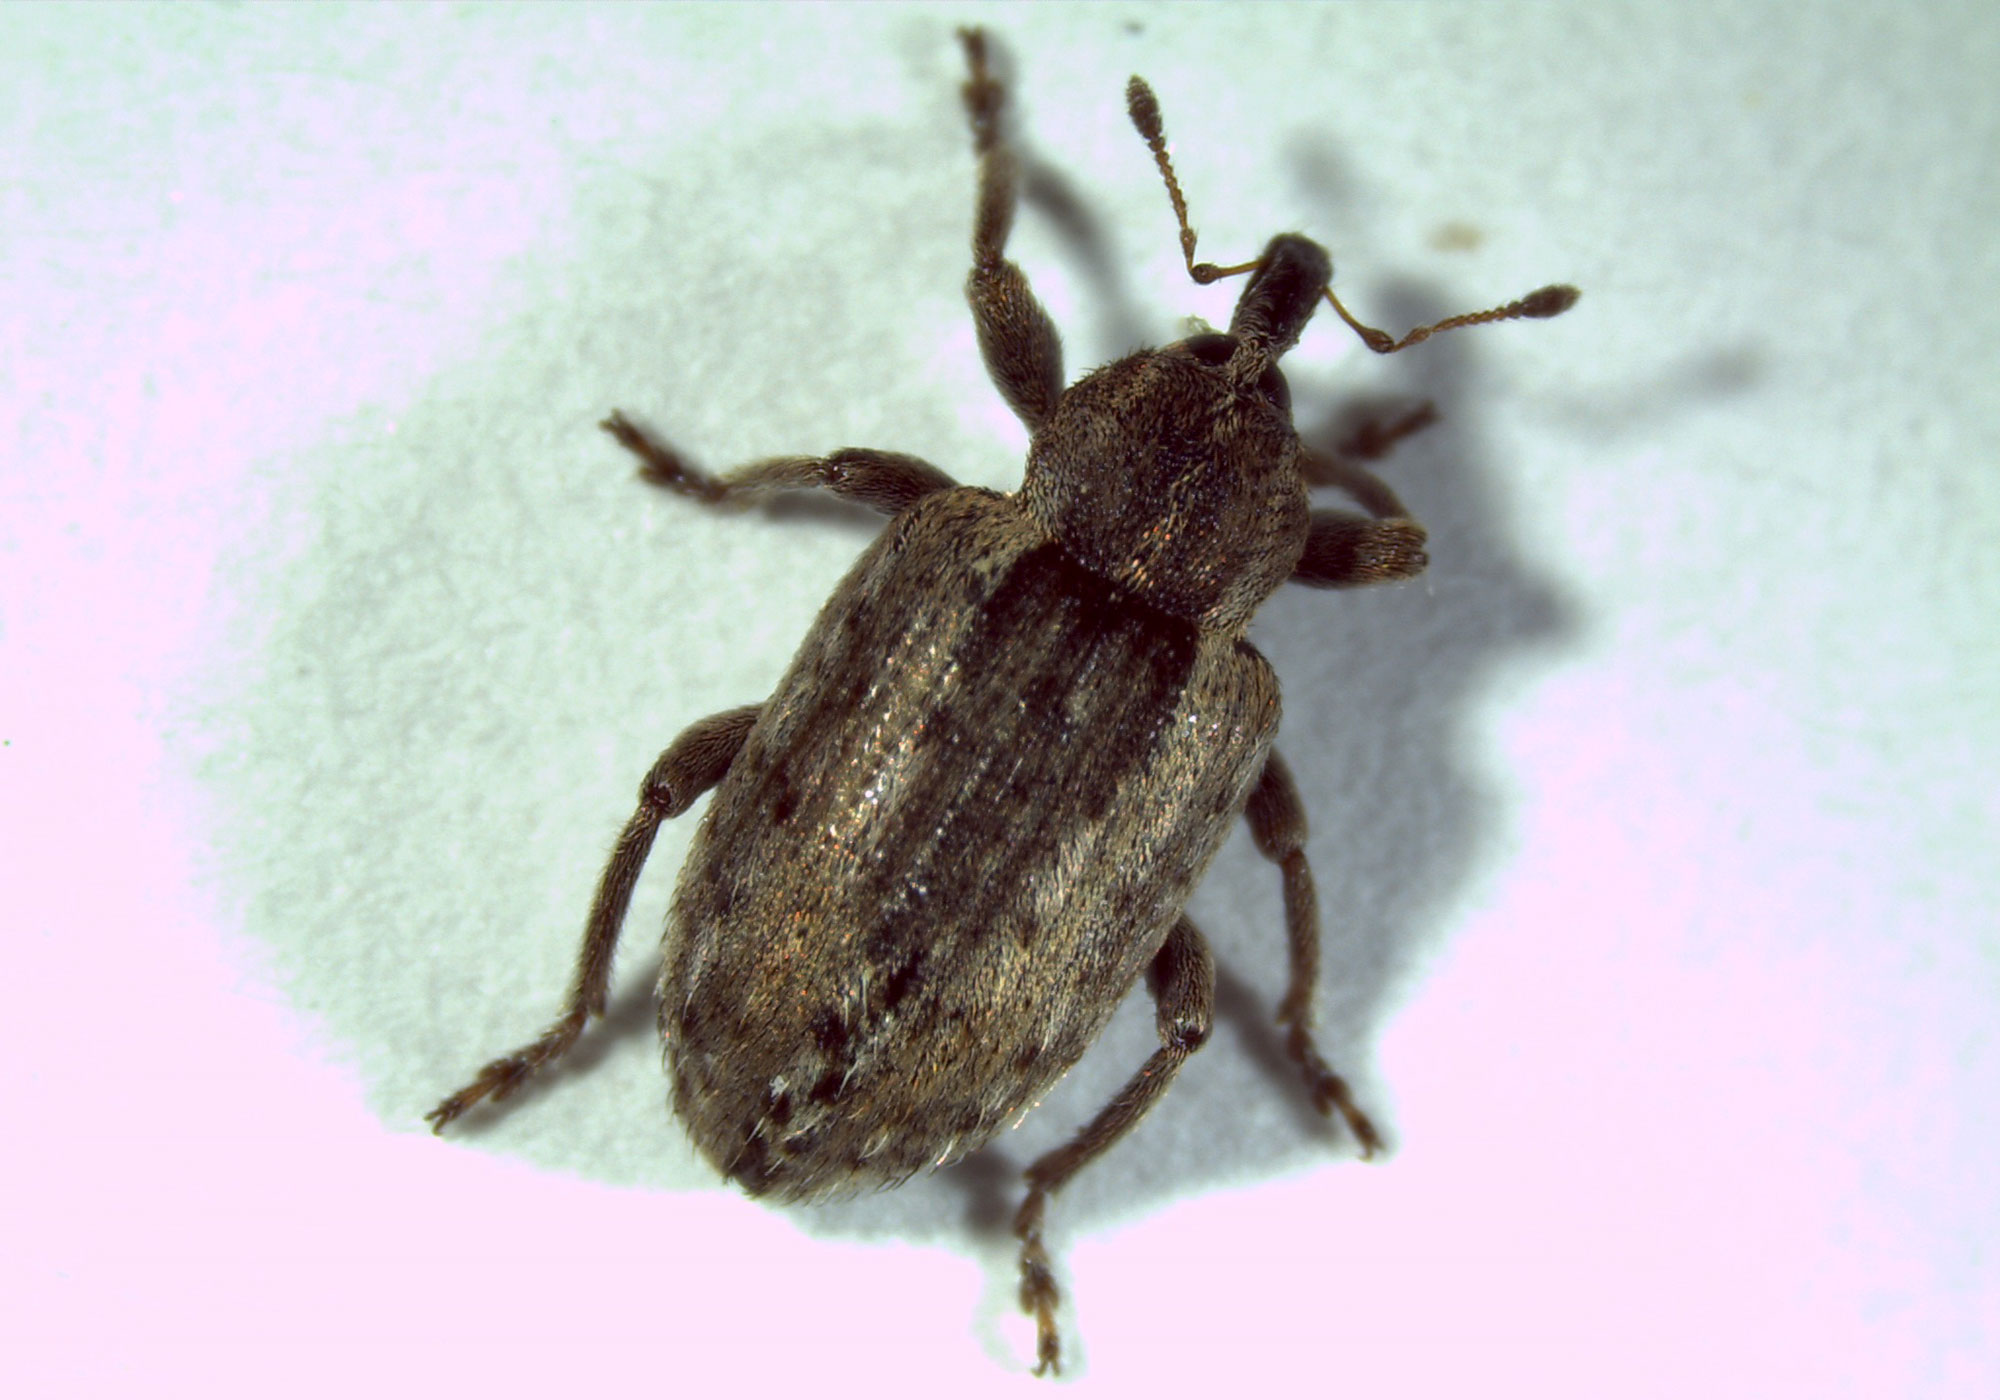 Brown weevil adult with dark band down center of its body.